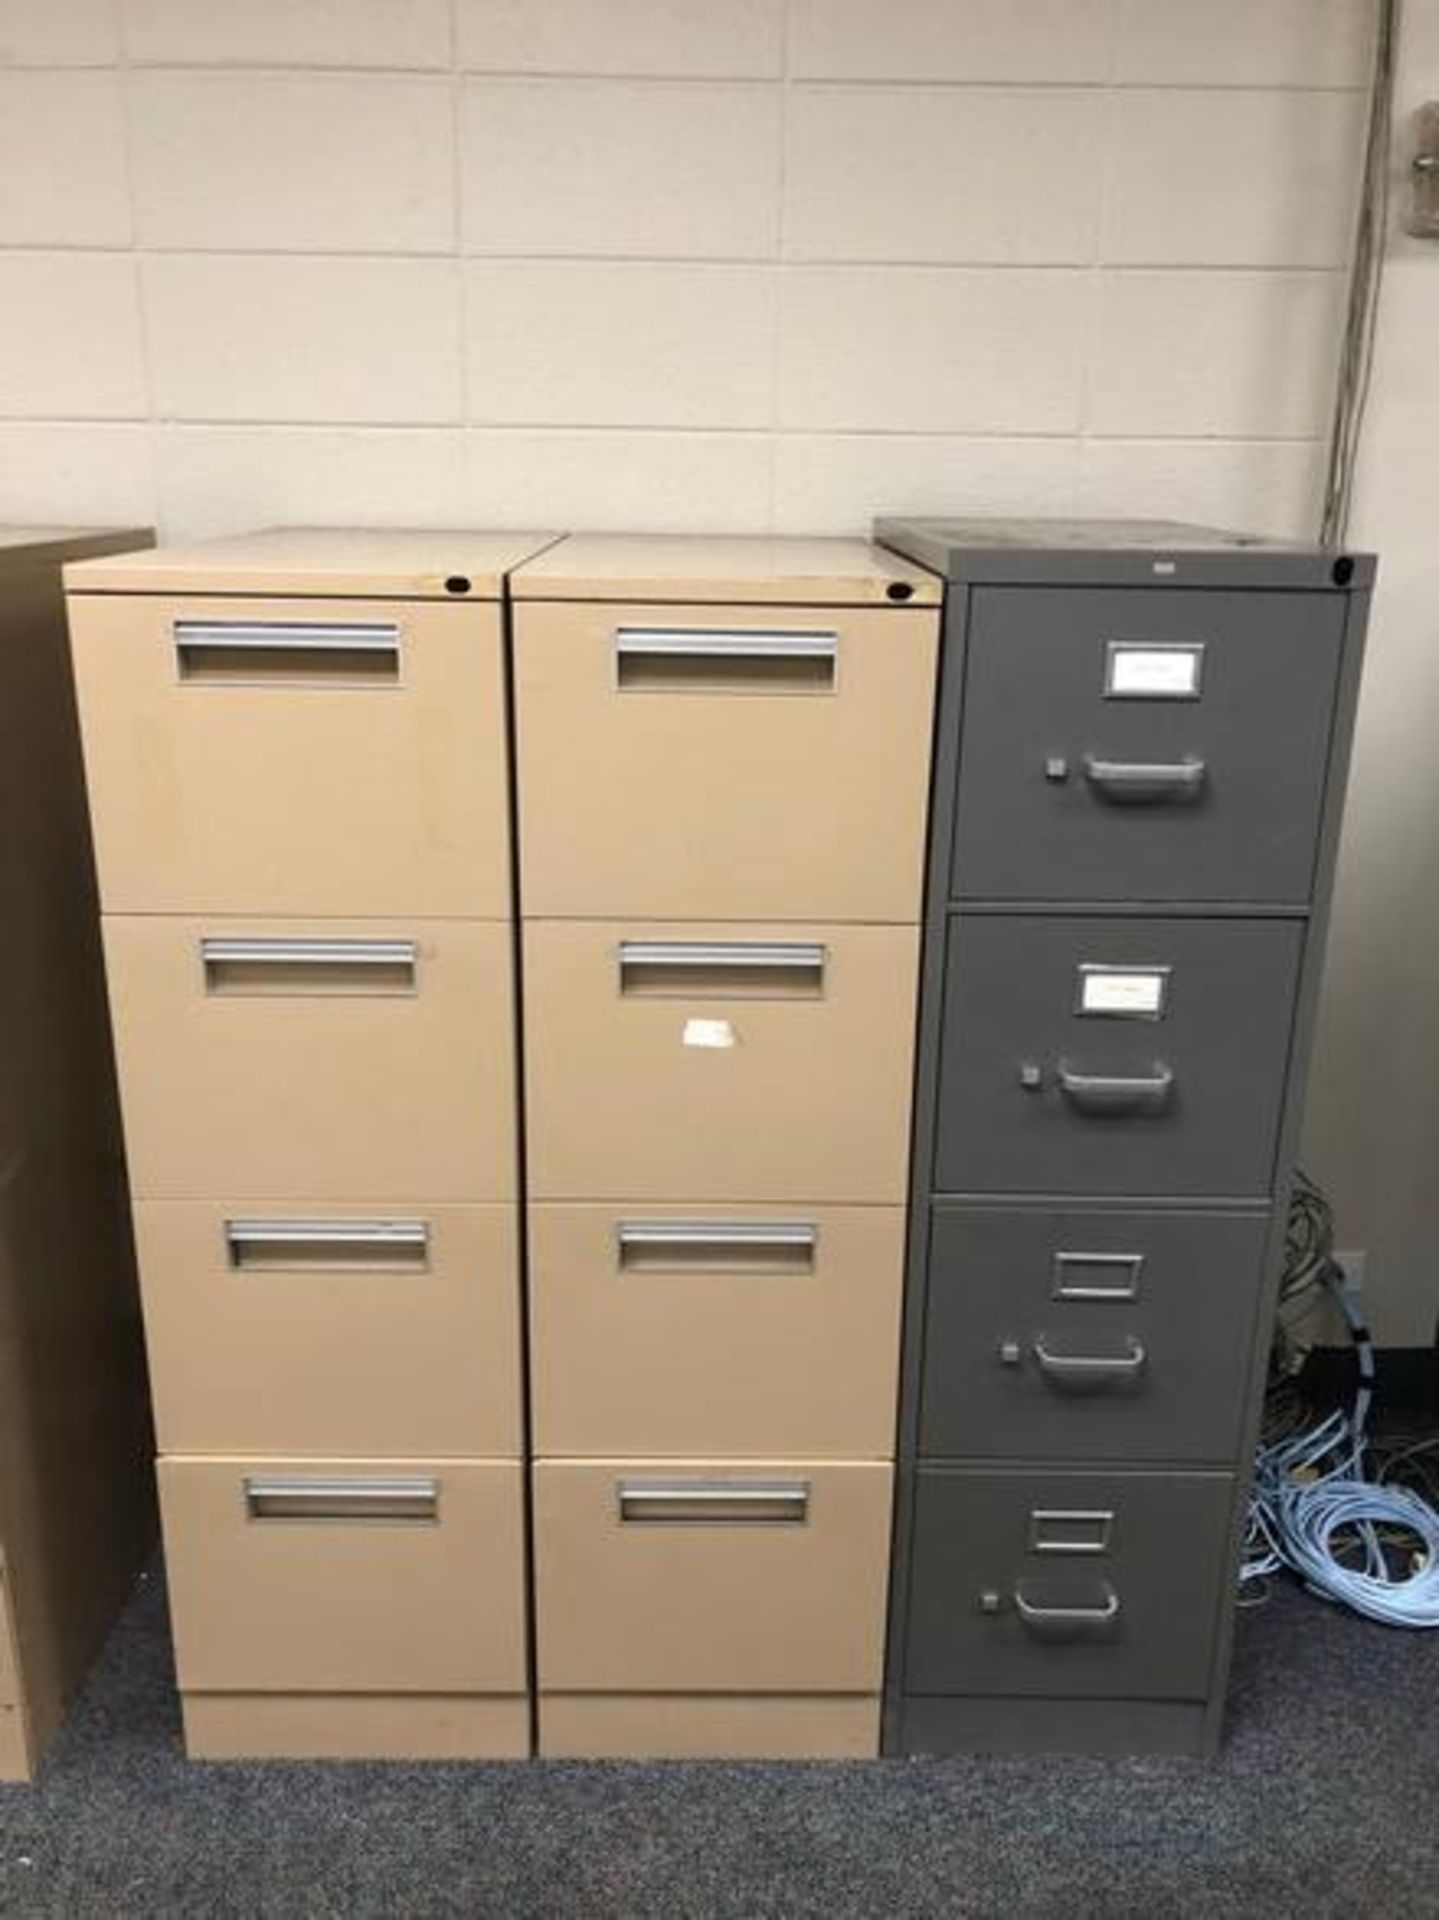 6 Vertical File Cabinets 5 Drawers - Image 3 of 3